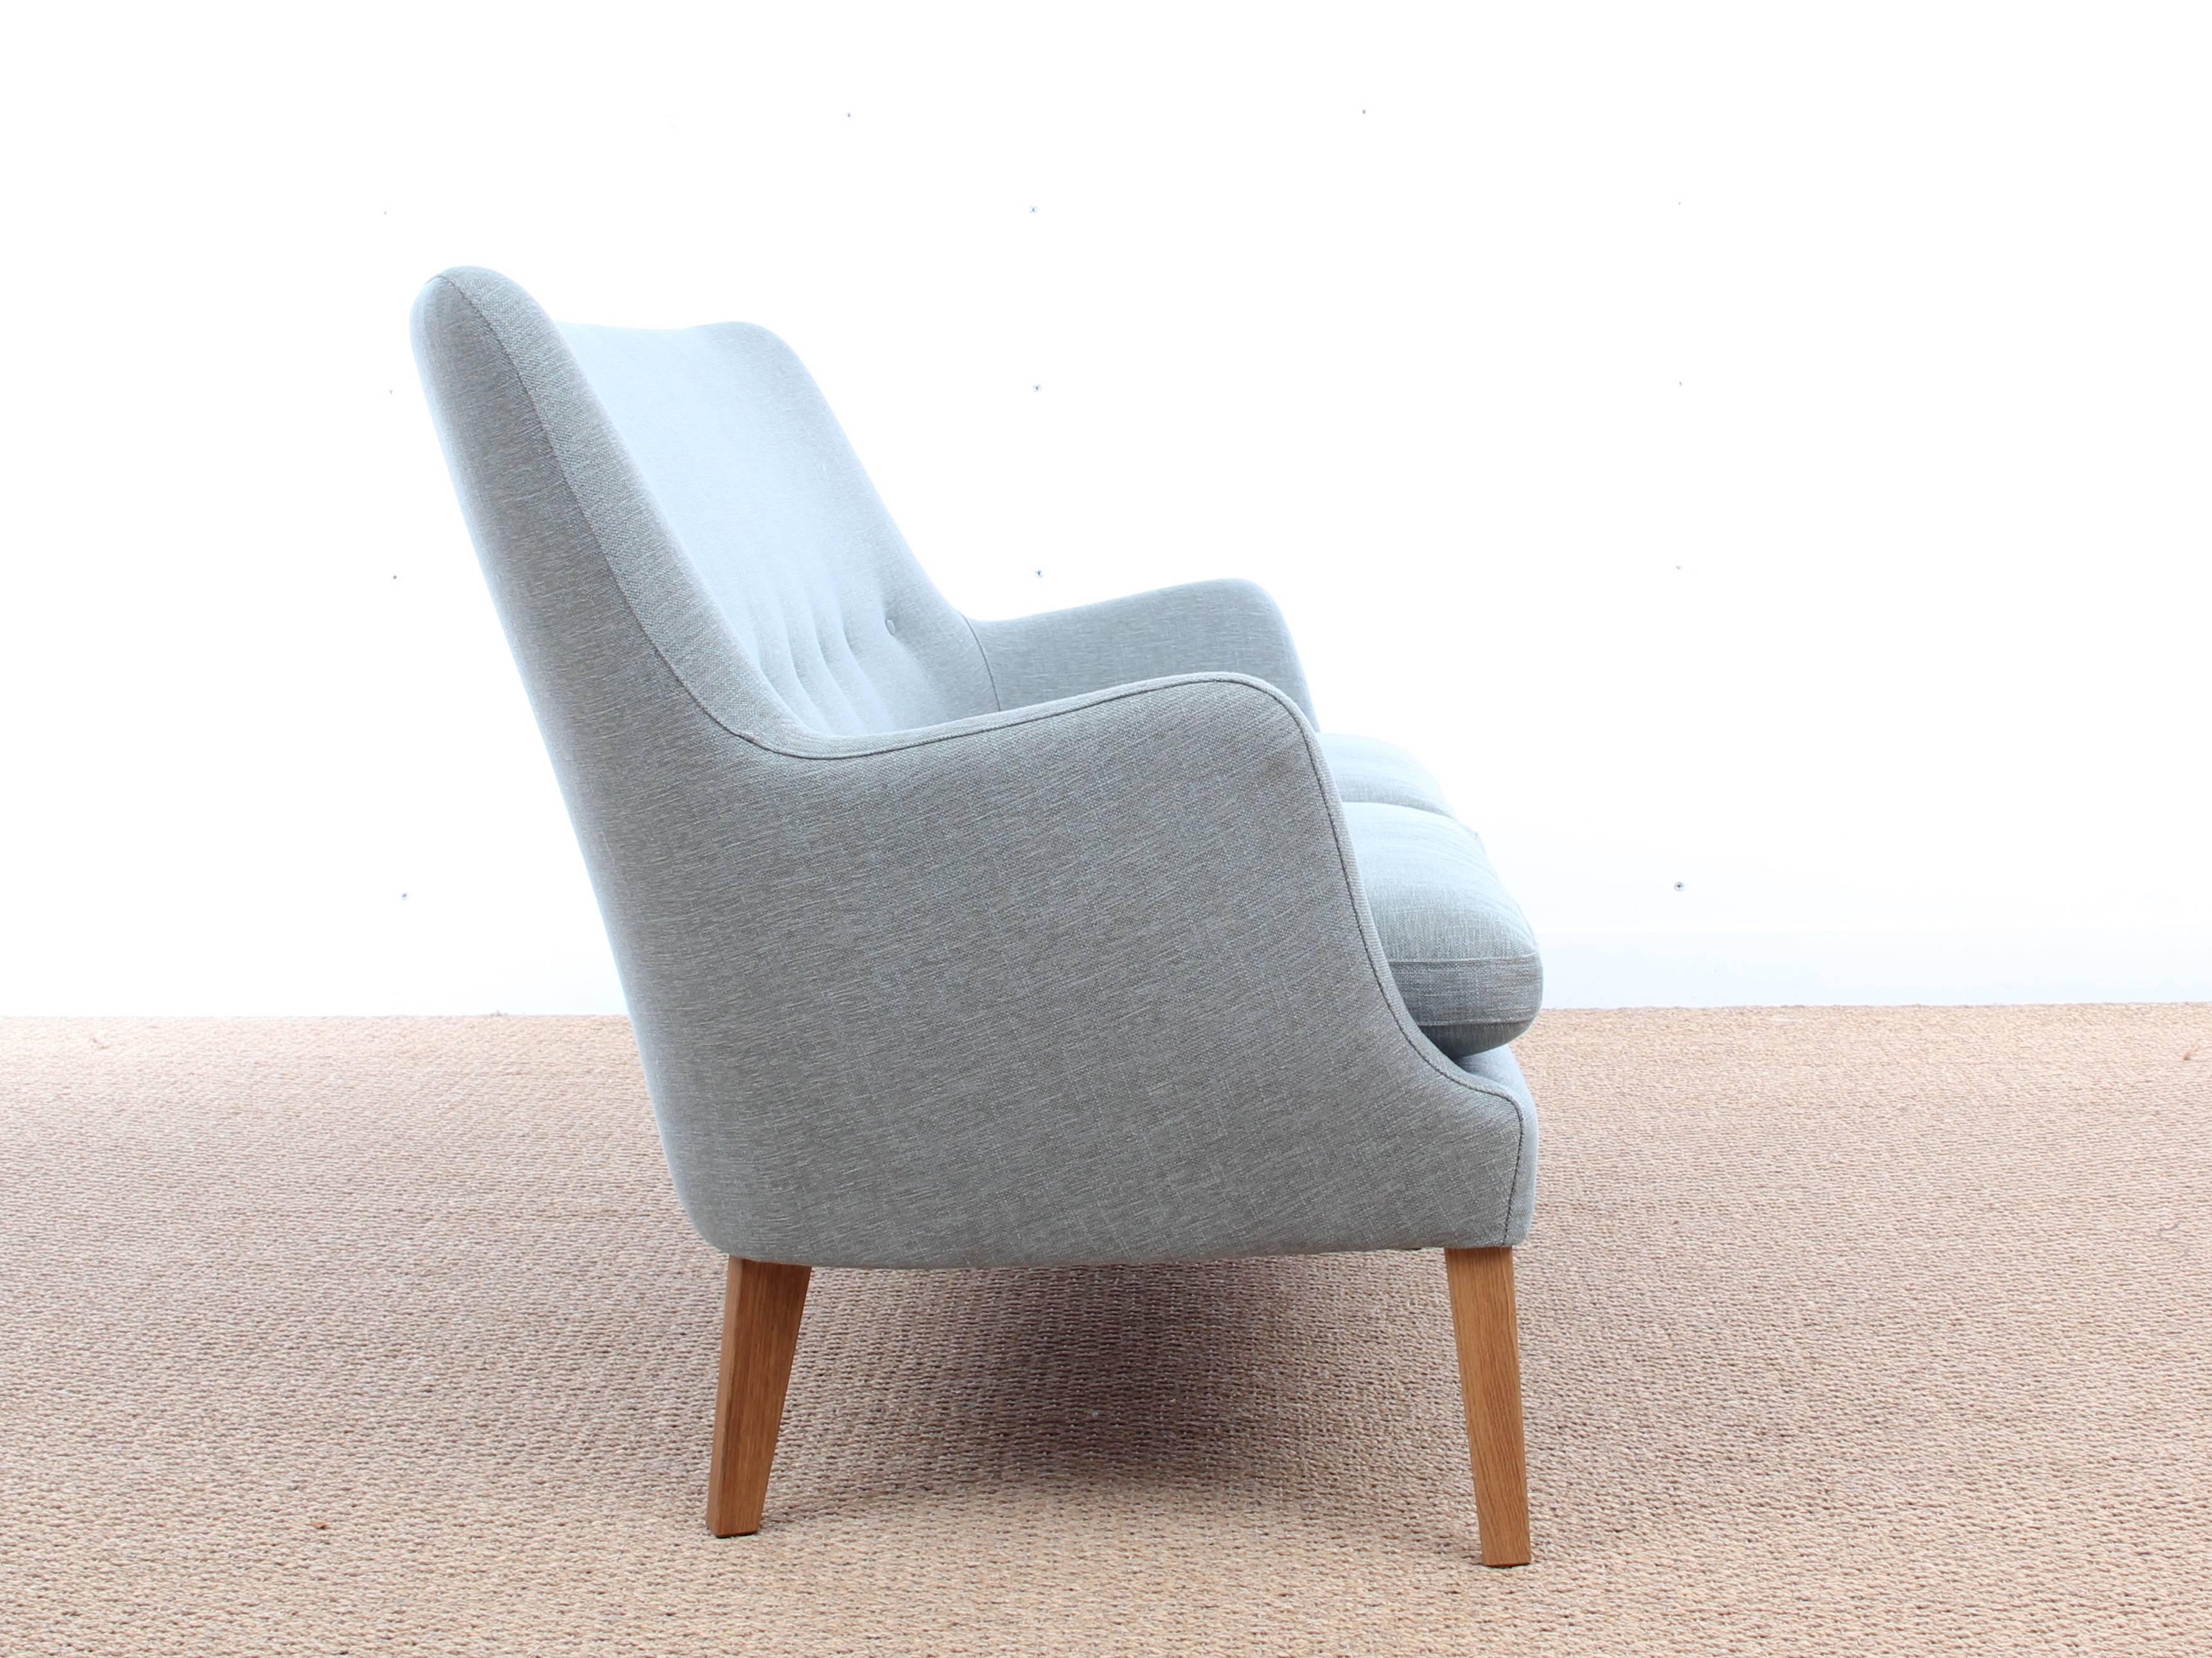 Mid-Century Modern scandinavian two seats sofa by Arne Vodder AV 53 new release. On demand only. Delivery time: 6 weeks. Available in three different fabrics. Samples on demand.